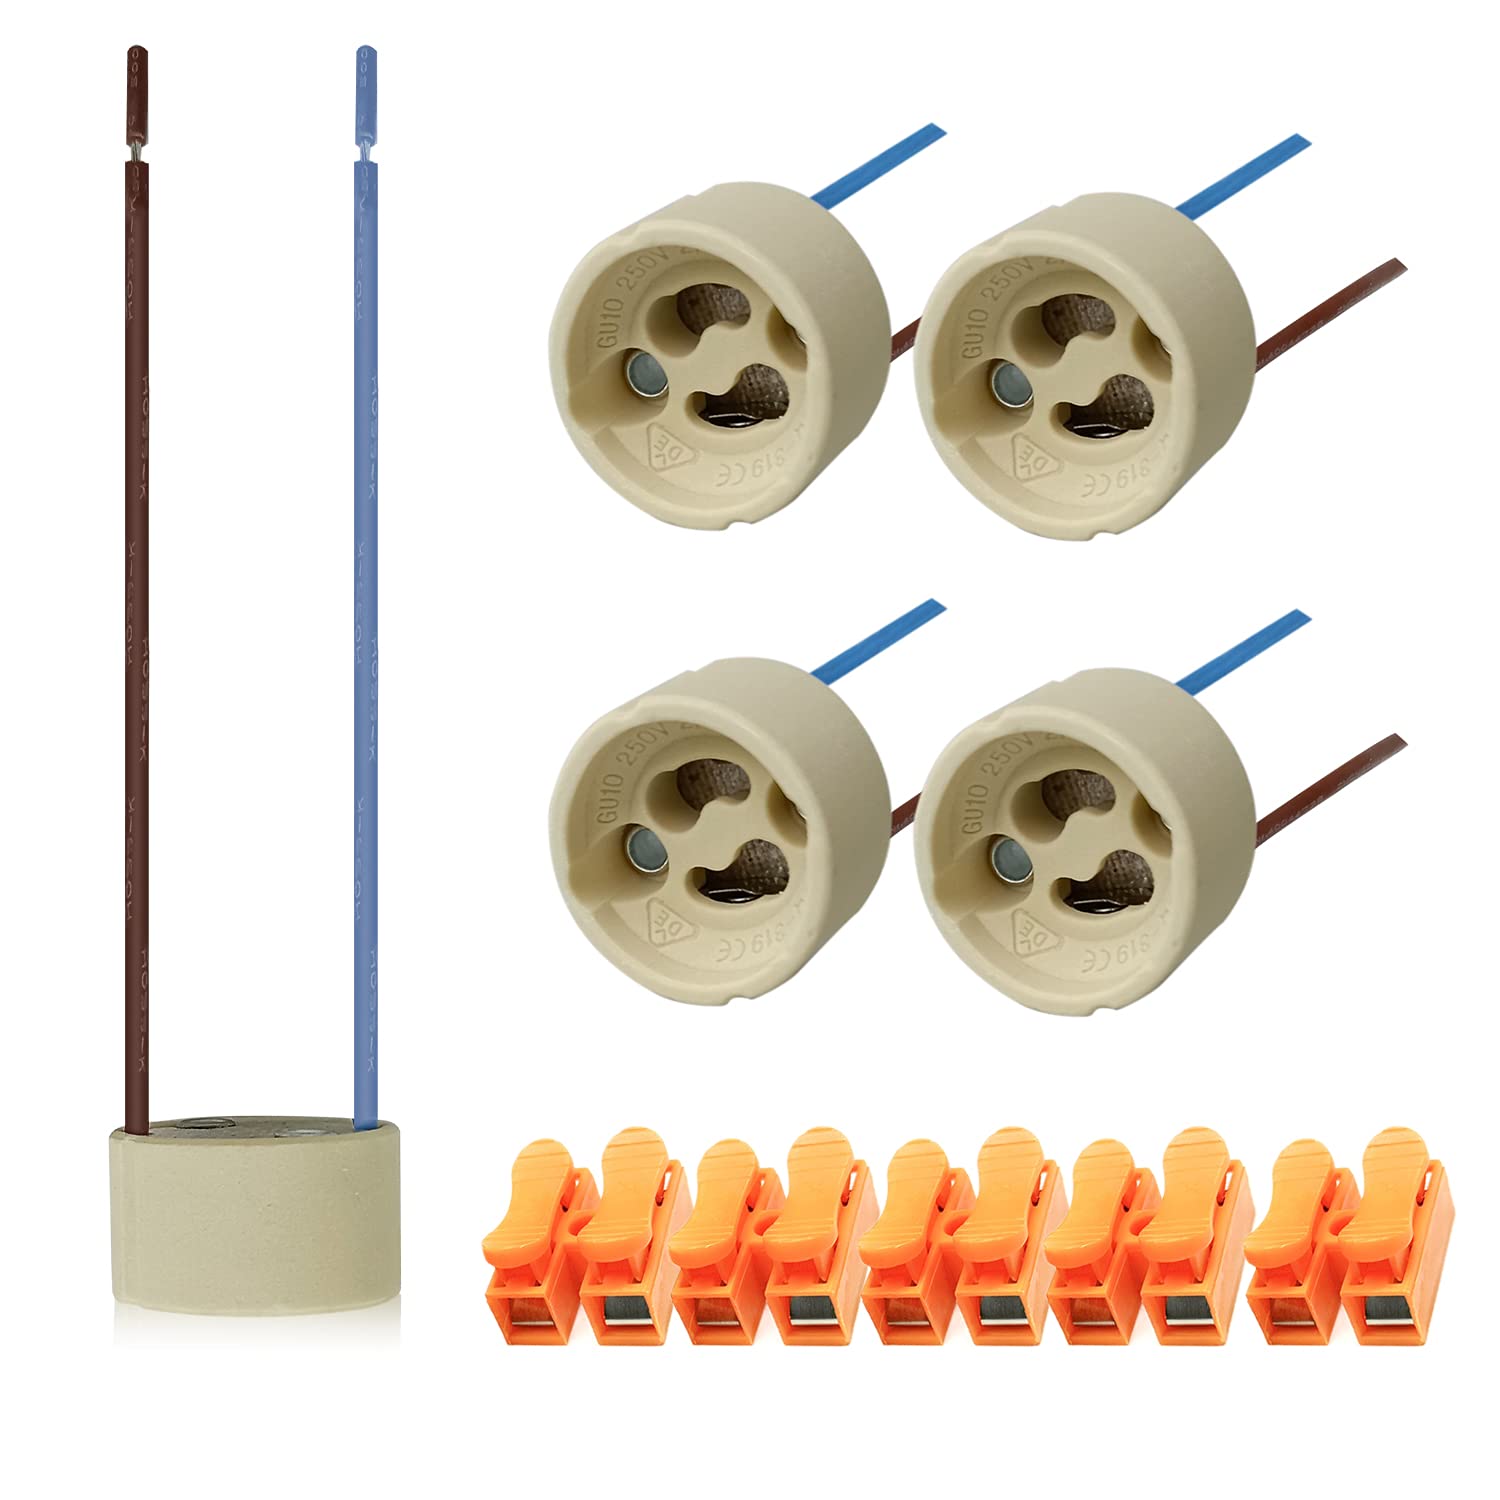 5 Sets of GU10 Lamp Holders,High Temperature Resistant Silicon Wire is Connected to GU10 Connector Ceramic Base, 0-250V ，Including Quick Connect terminals,Suitable for LED Bulbs.